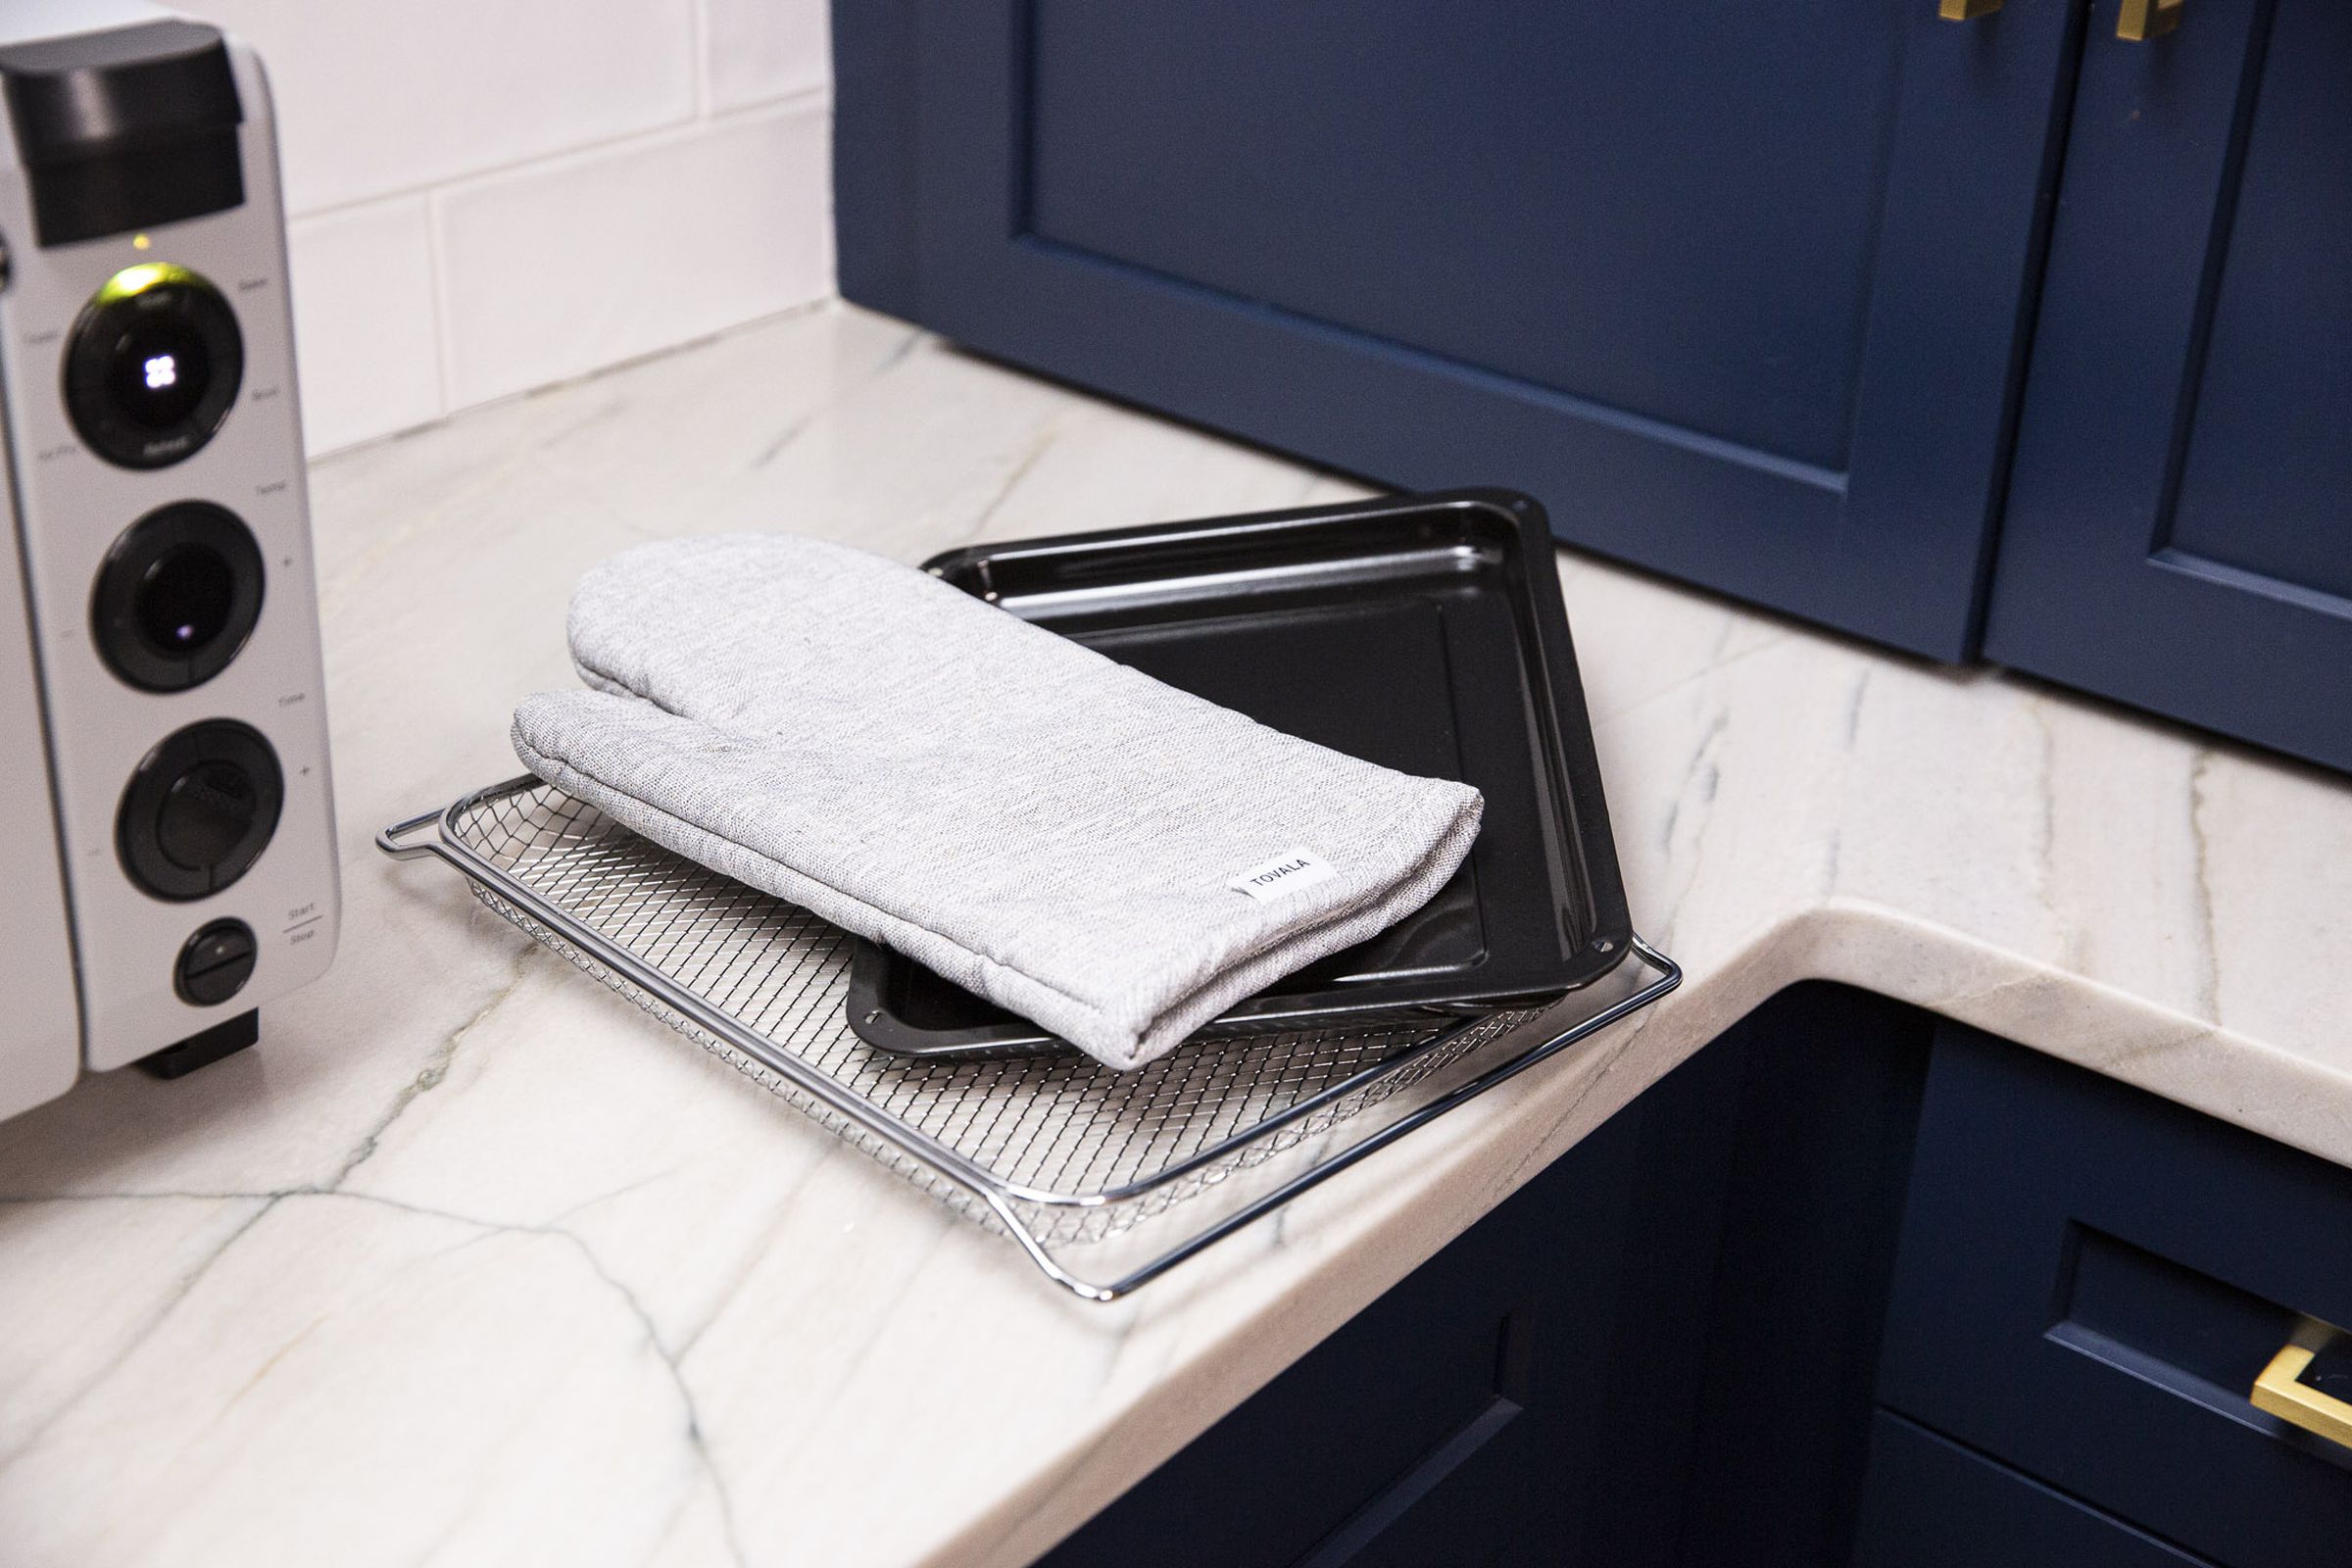 The Tovala comes with an air fry basket, a sheet tray, and an oven glove.